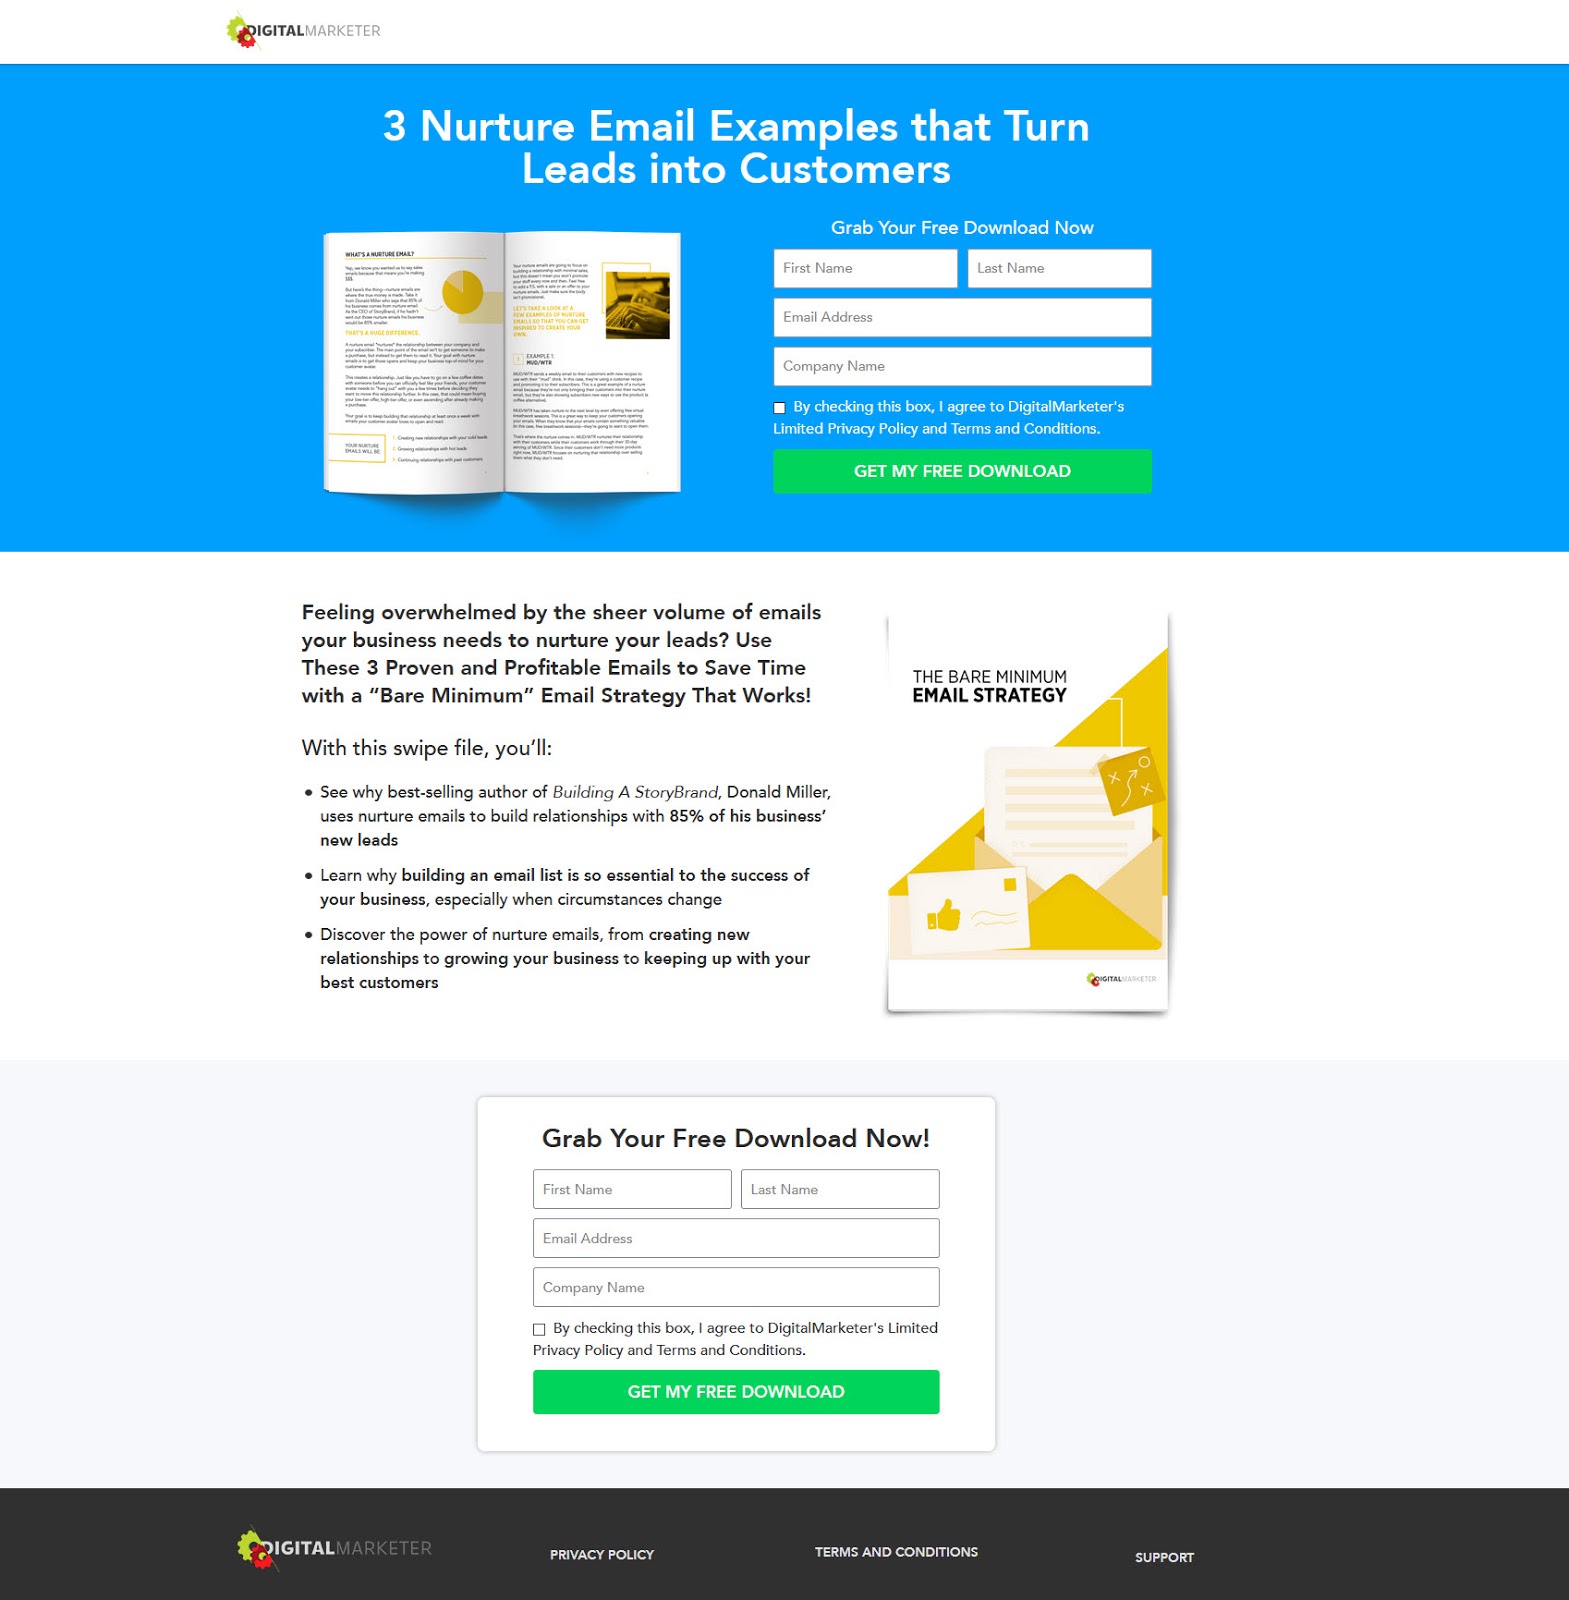 dine planer næve How To Create Your Own Lead Generation Landing Page, In Just 24 hours